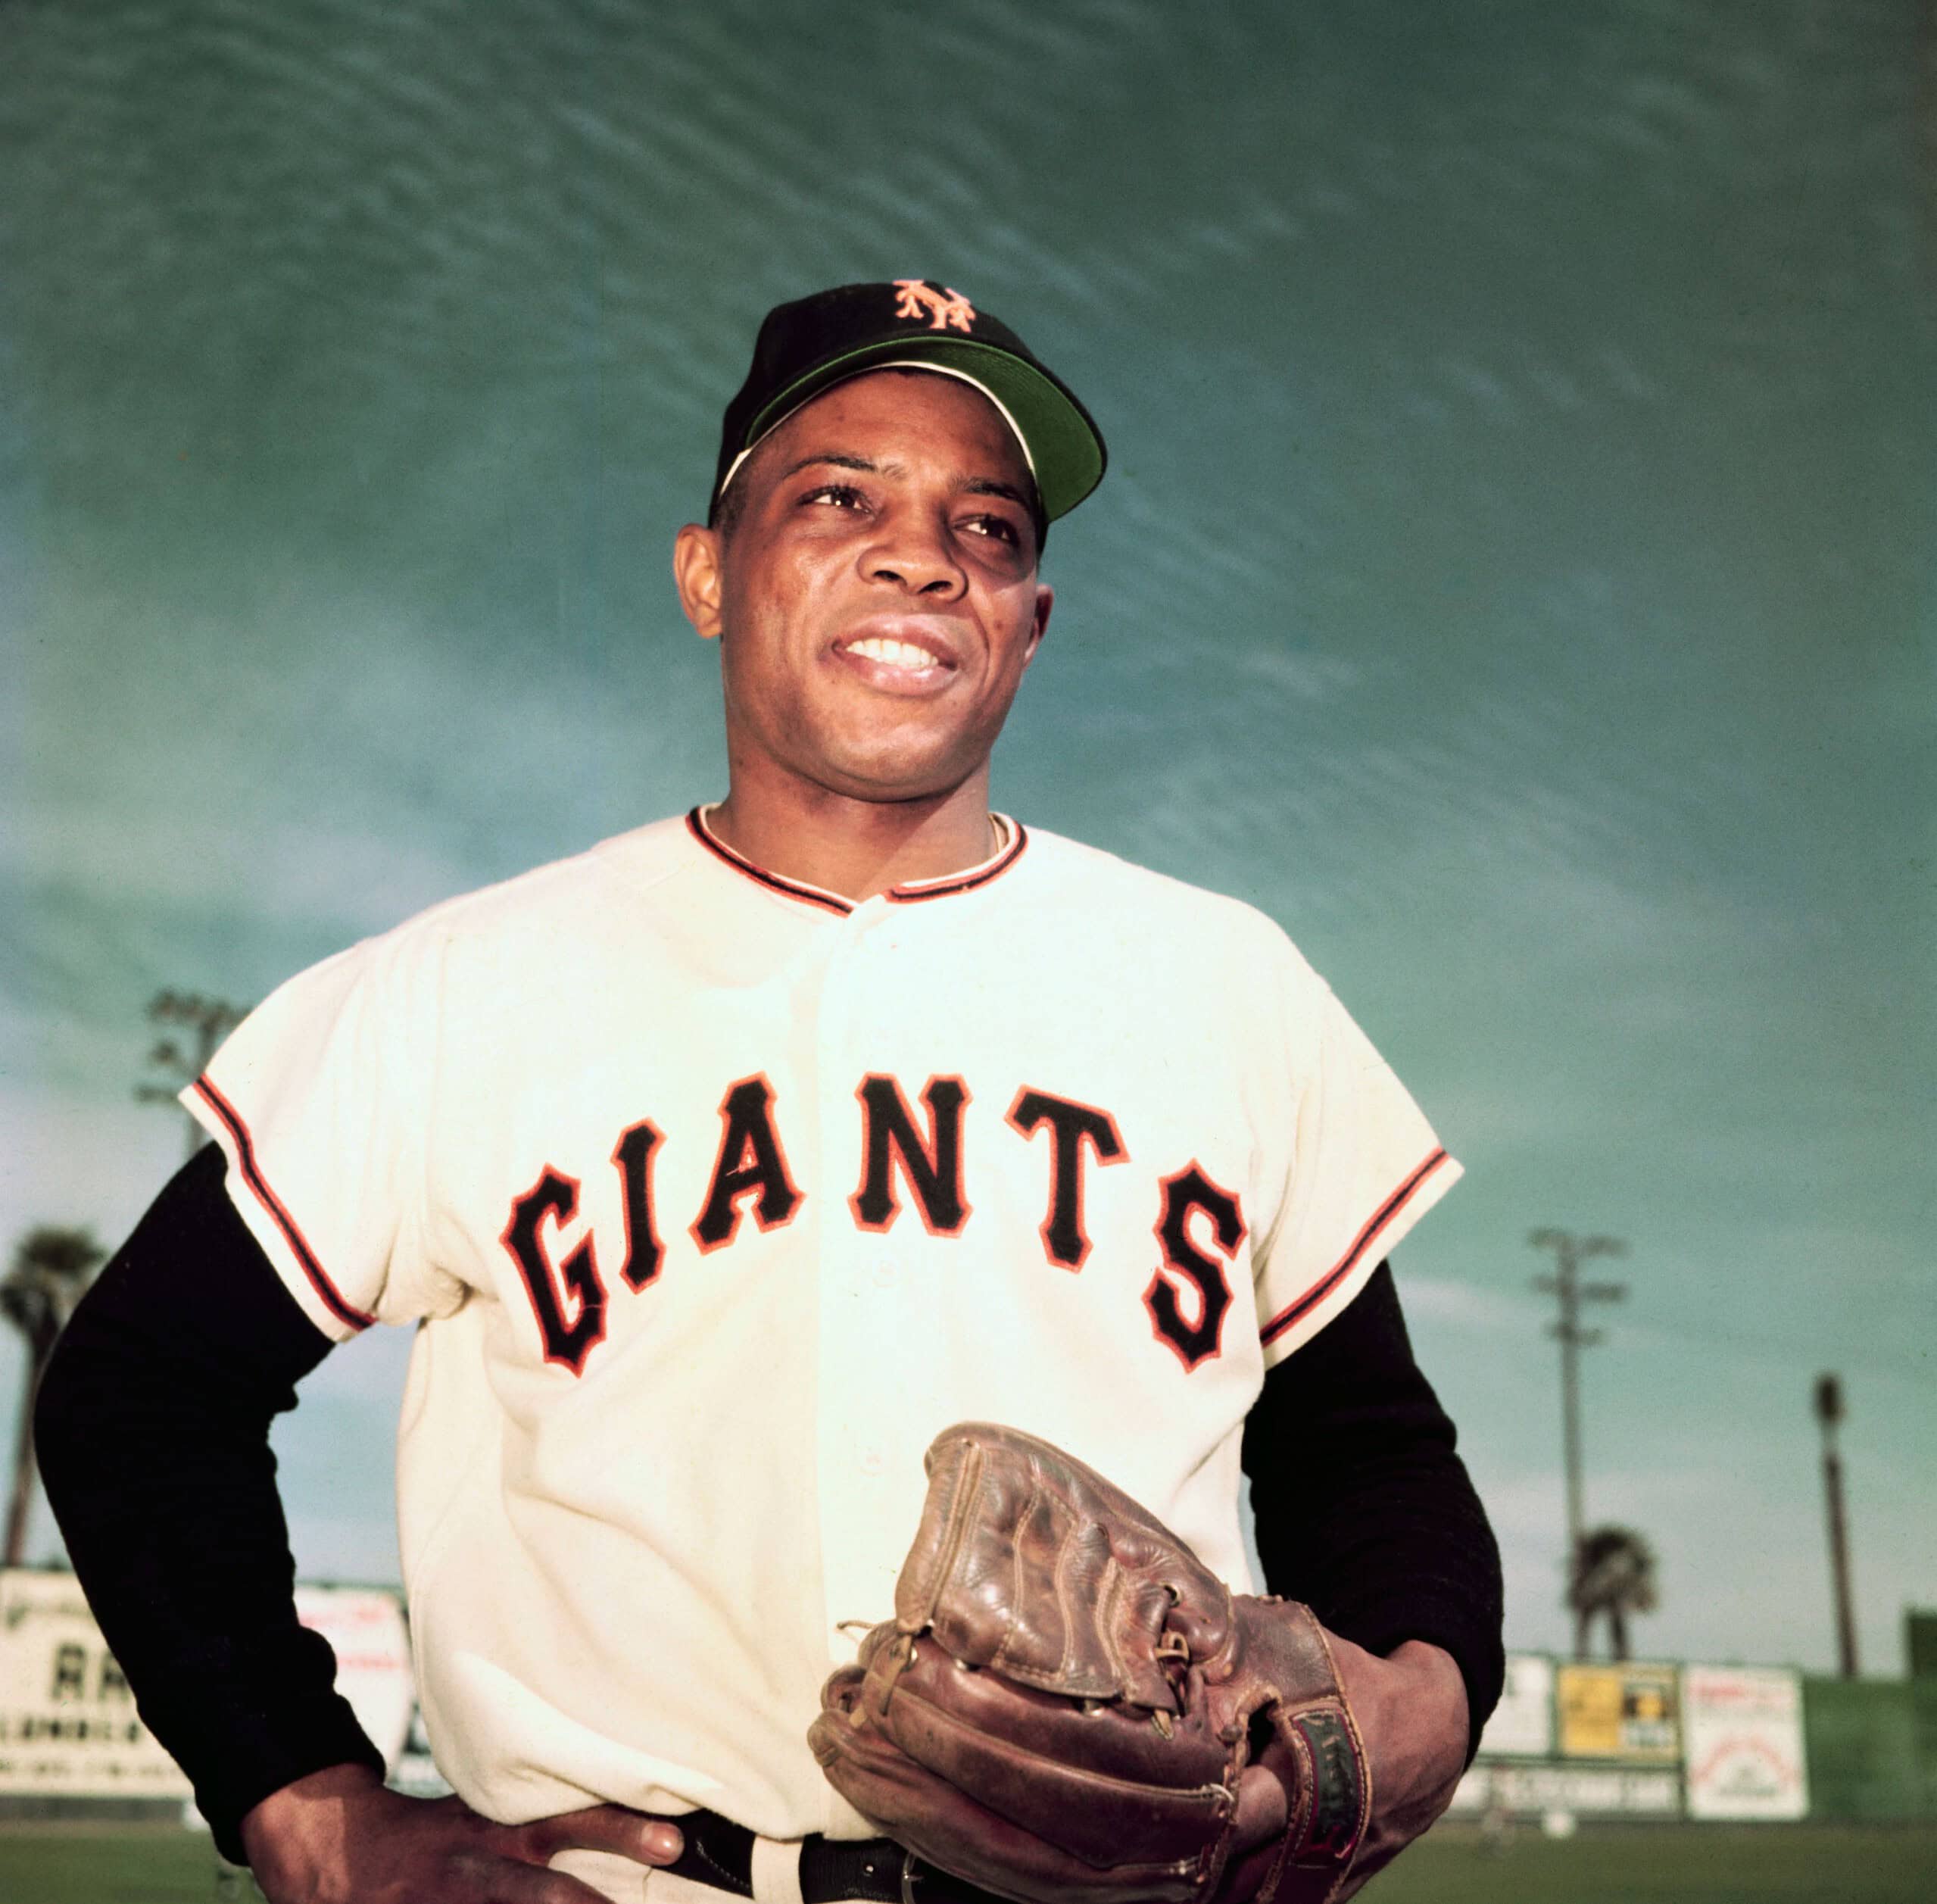 Remembering Baseball Icon Willie Mays Who Passes Away at 93